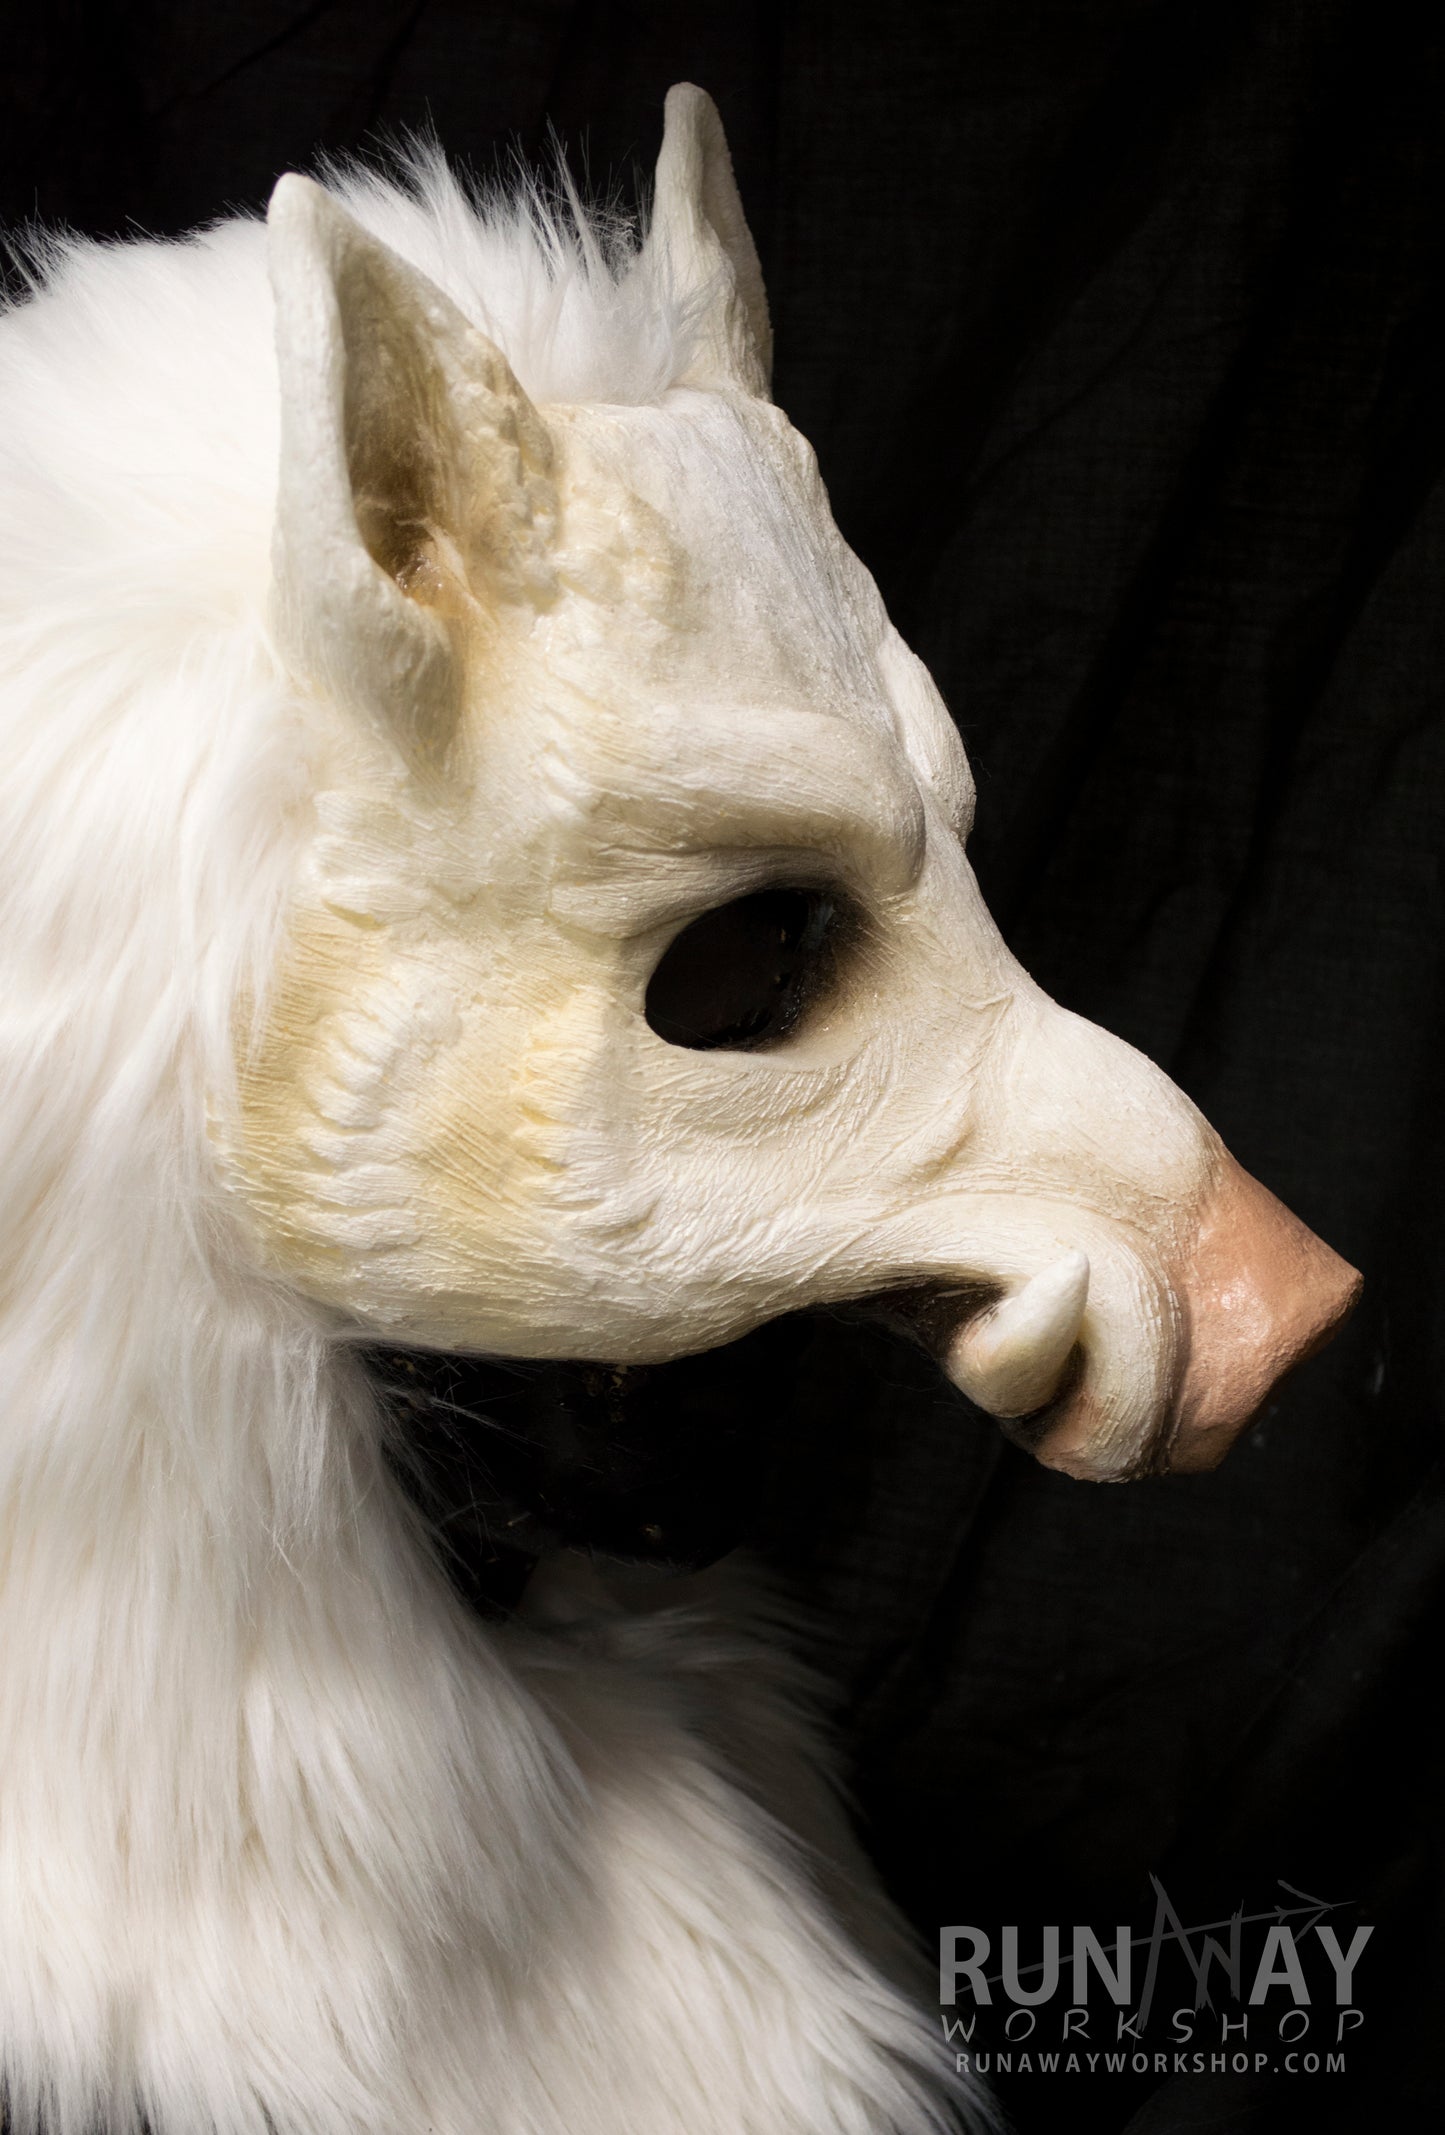 White boar, durable hooded mask for LARP, performance and costuming